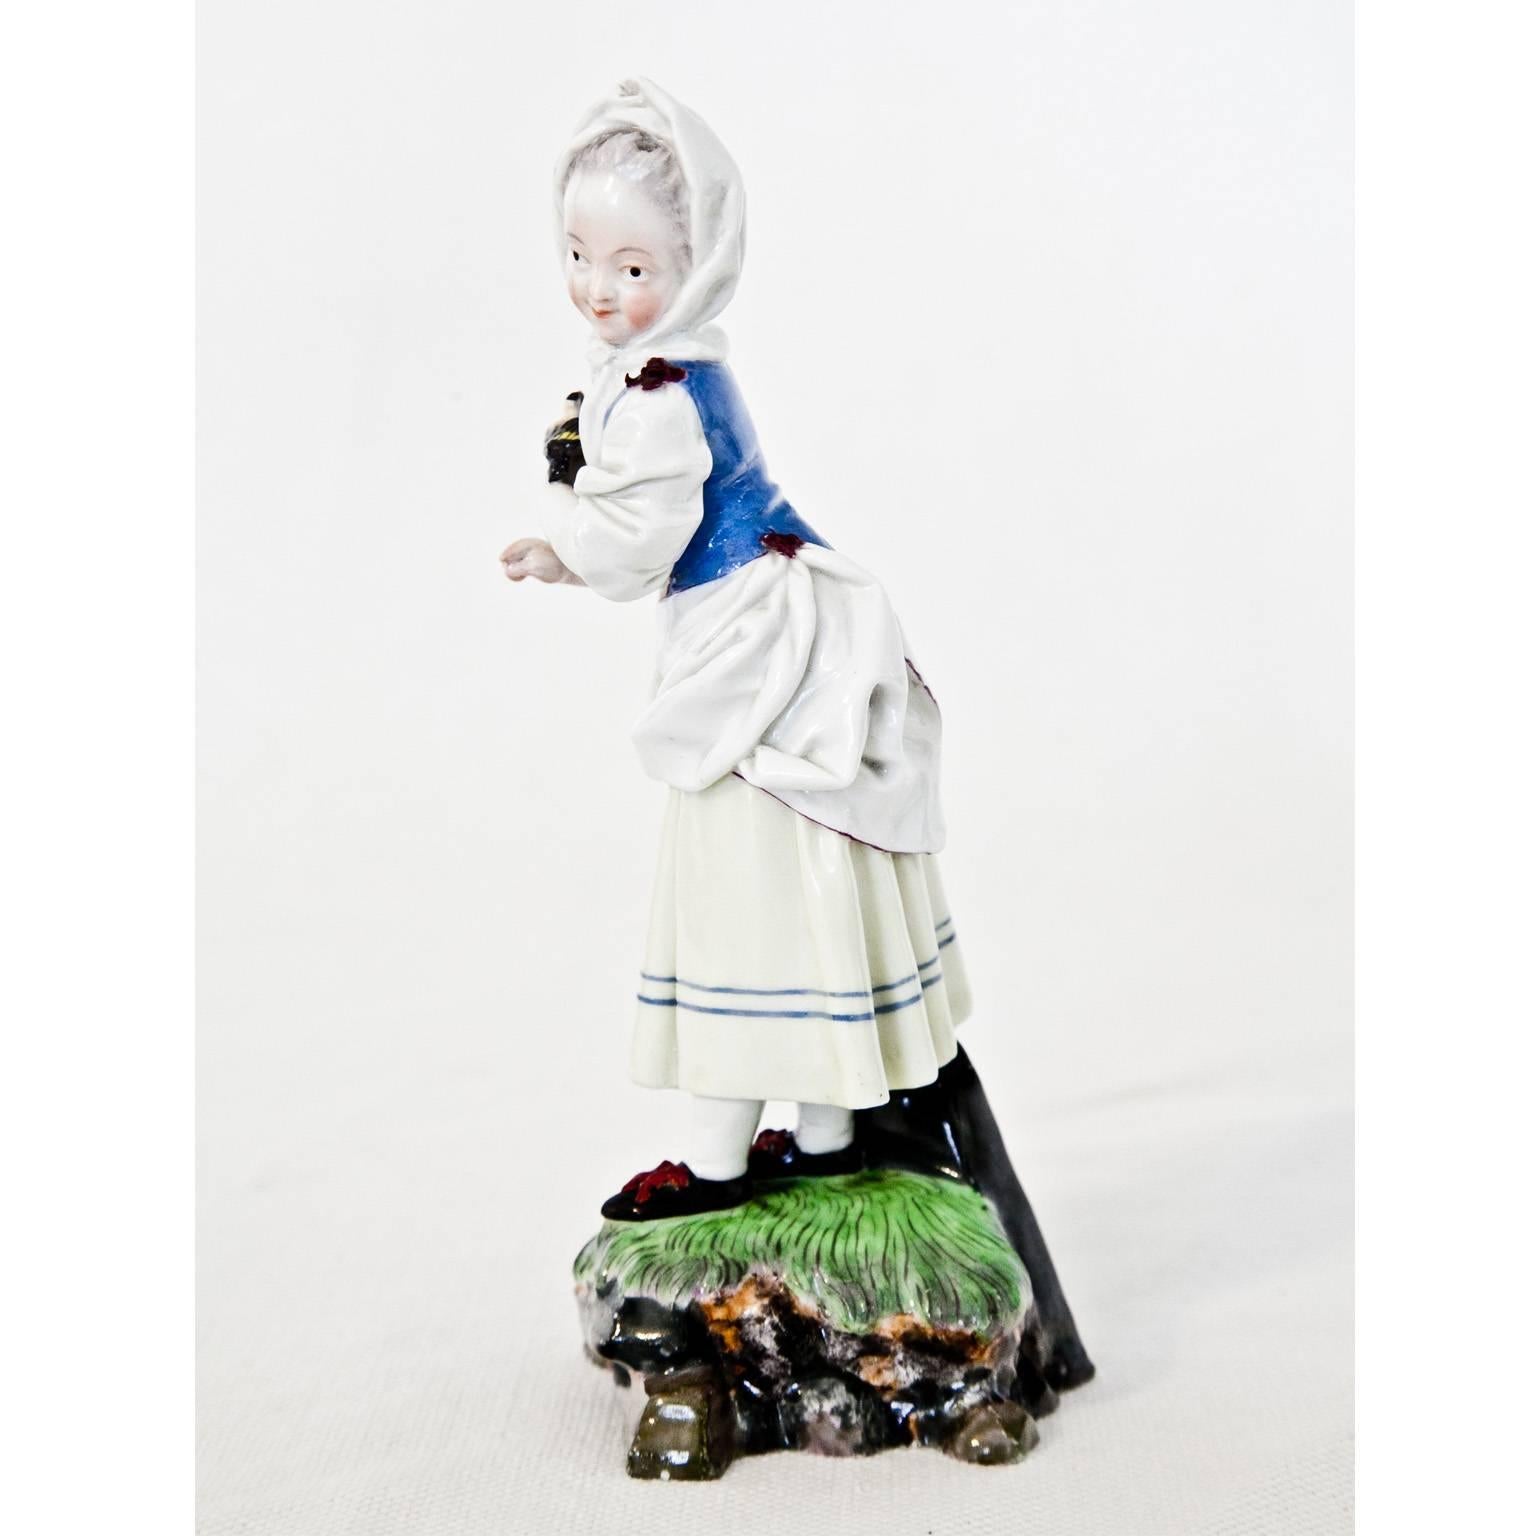 Polychrome porcelain figurine of a girl with a white bonnet and a little bird in her hand, standing on a landscape base. Design by Johann Peter Melchior, blue mark at the bottom of the porcelain manufactory Höchst.